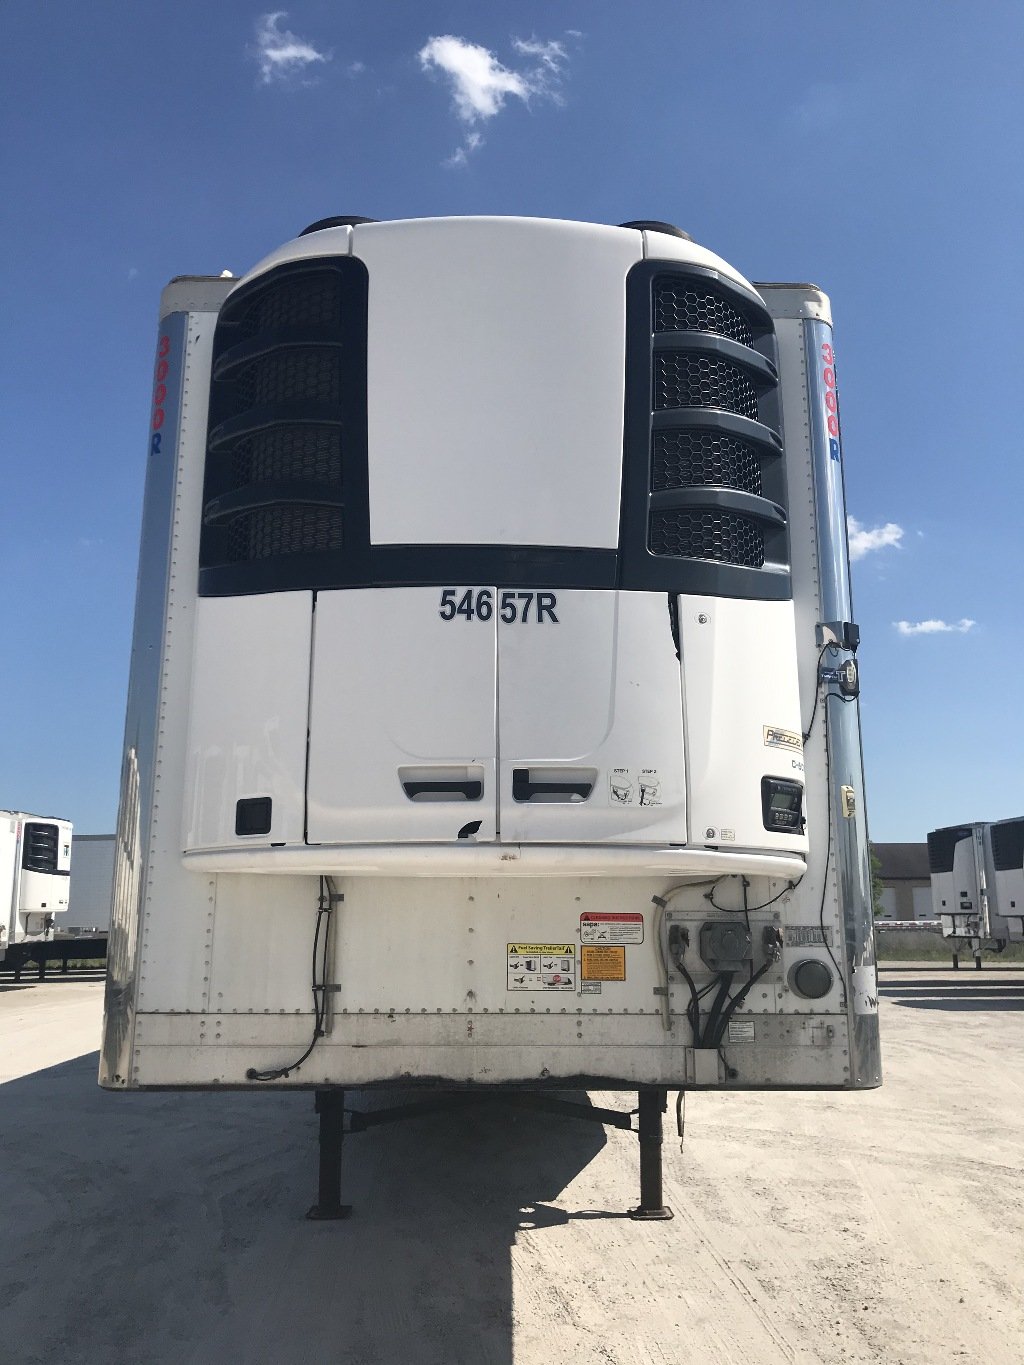 USED 2017 UTILITY 3000R REEFER TRAILER #301790